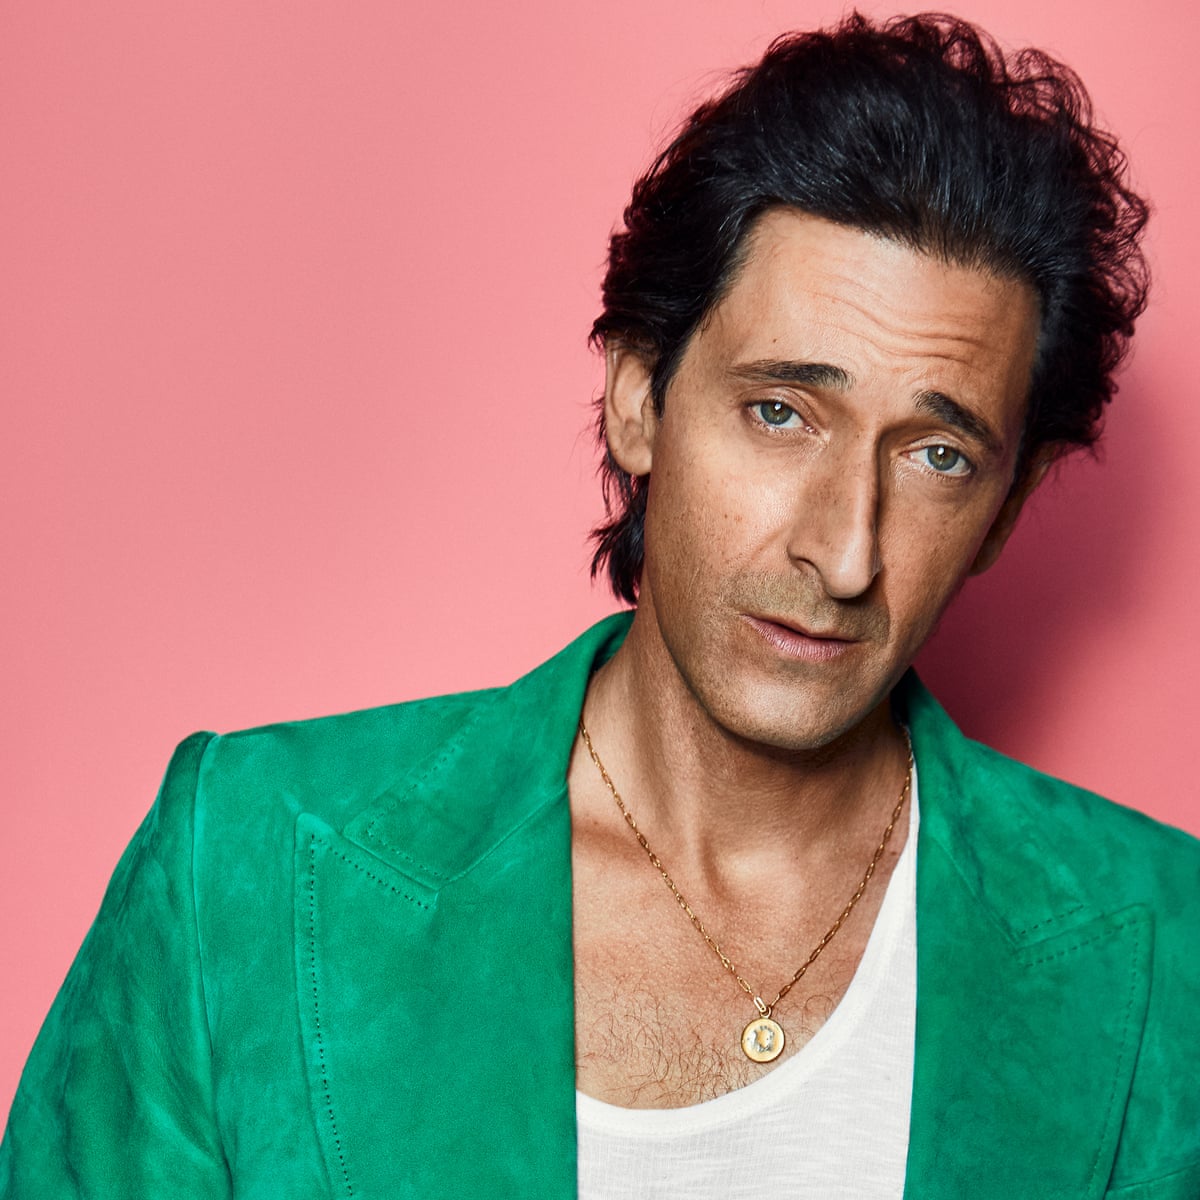 @DimensionsInJen I wouldn't 😎 /j

Adrien Brody would be cool